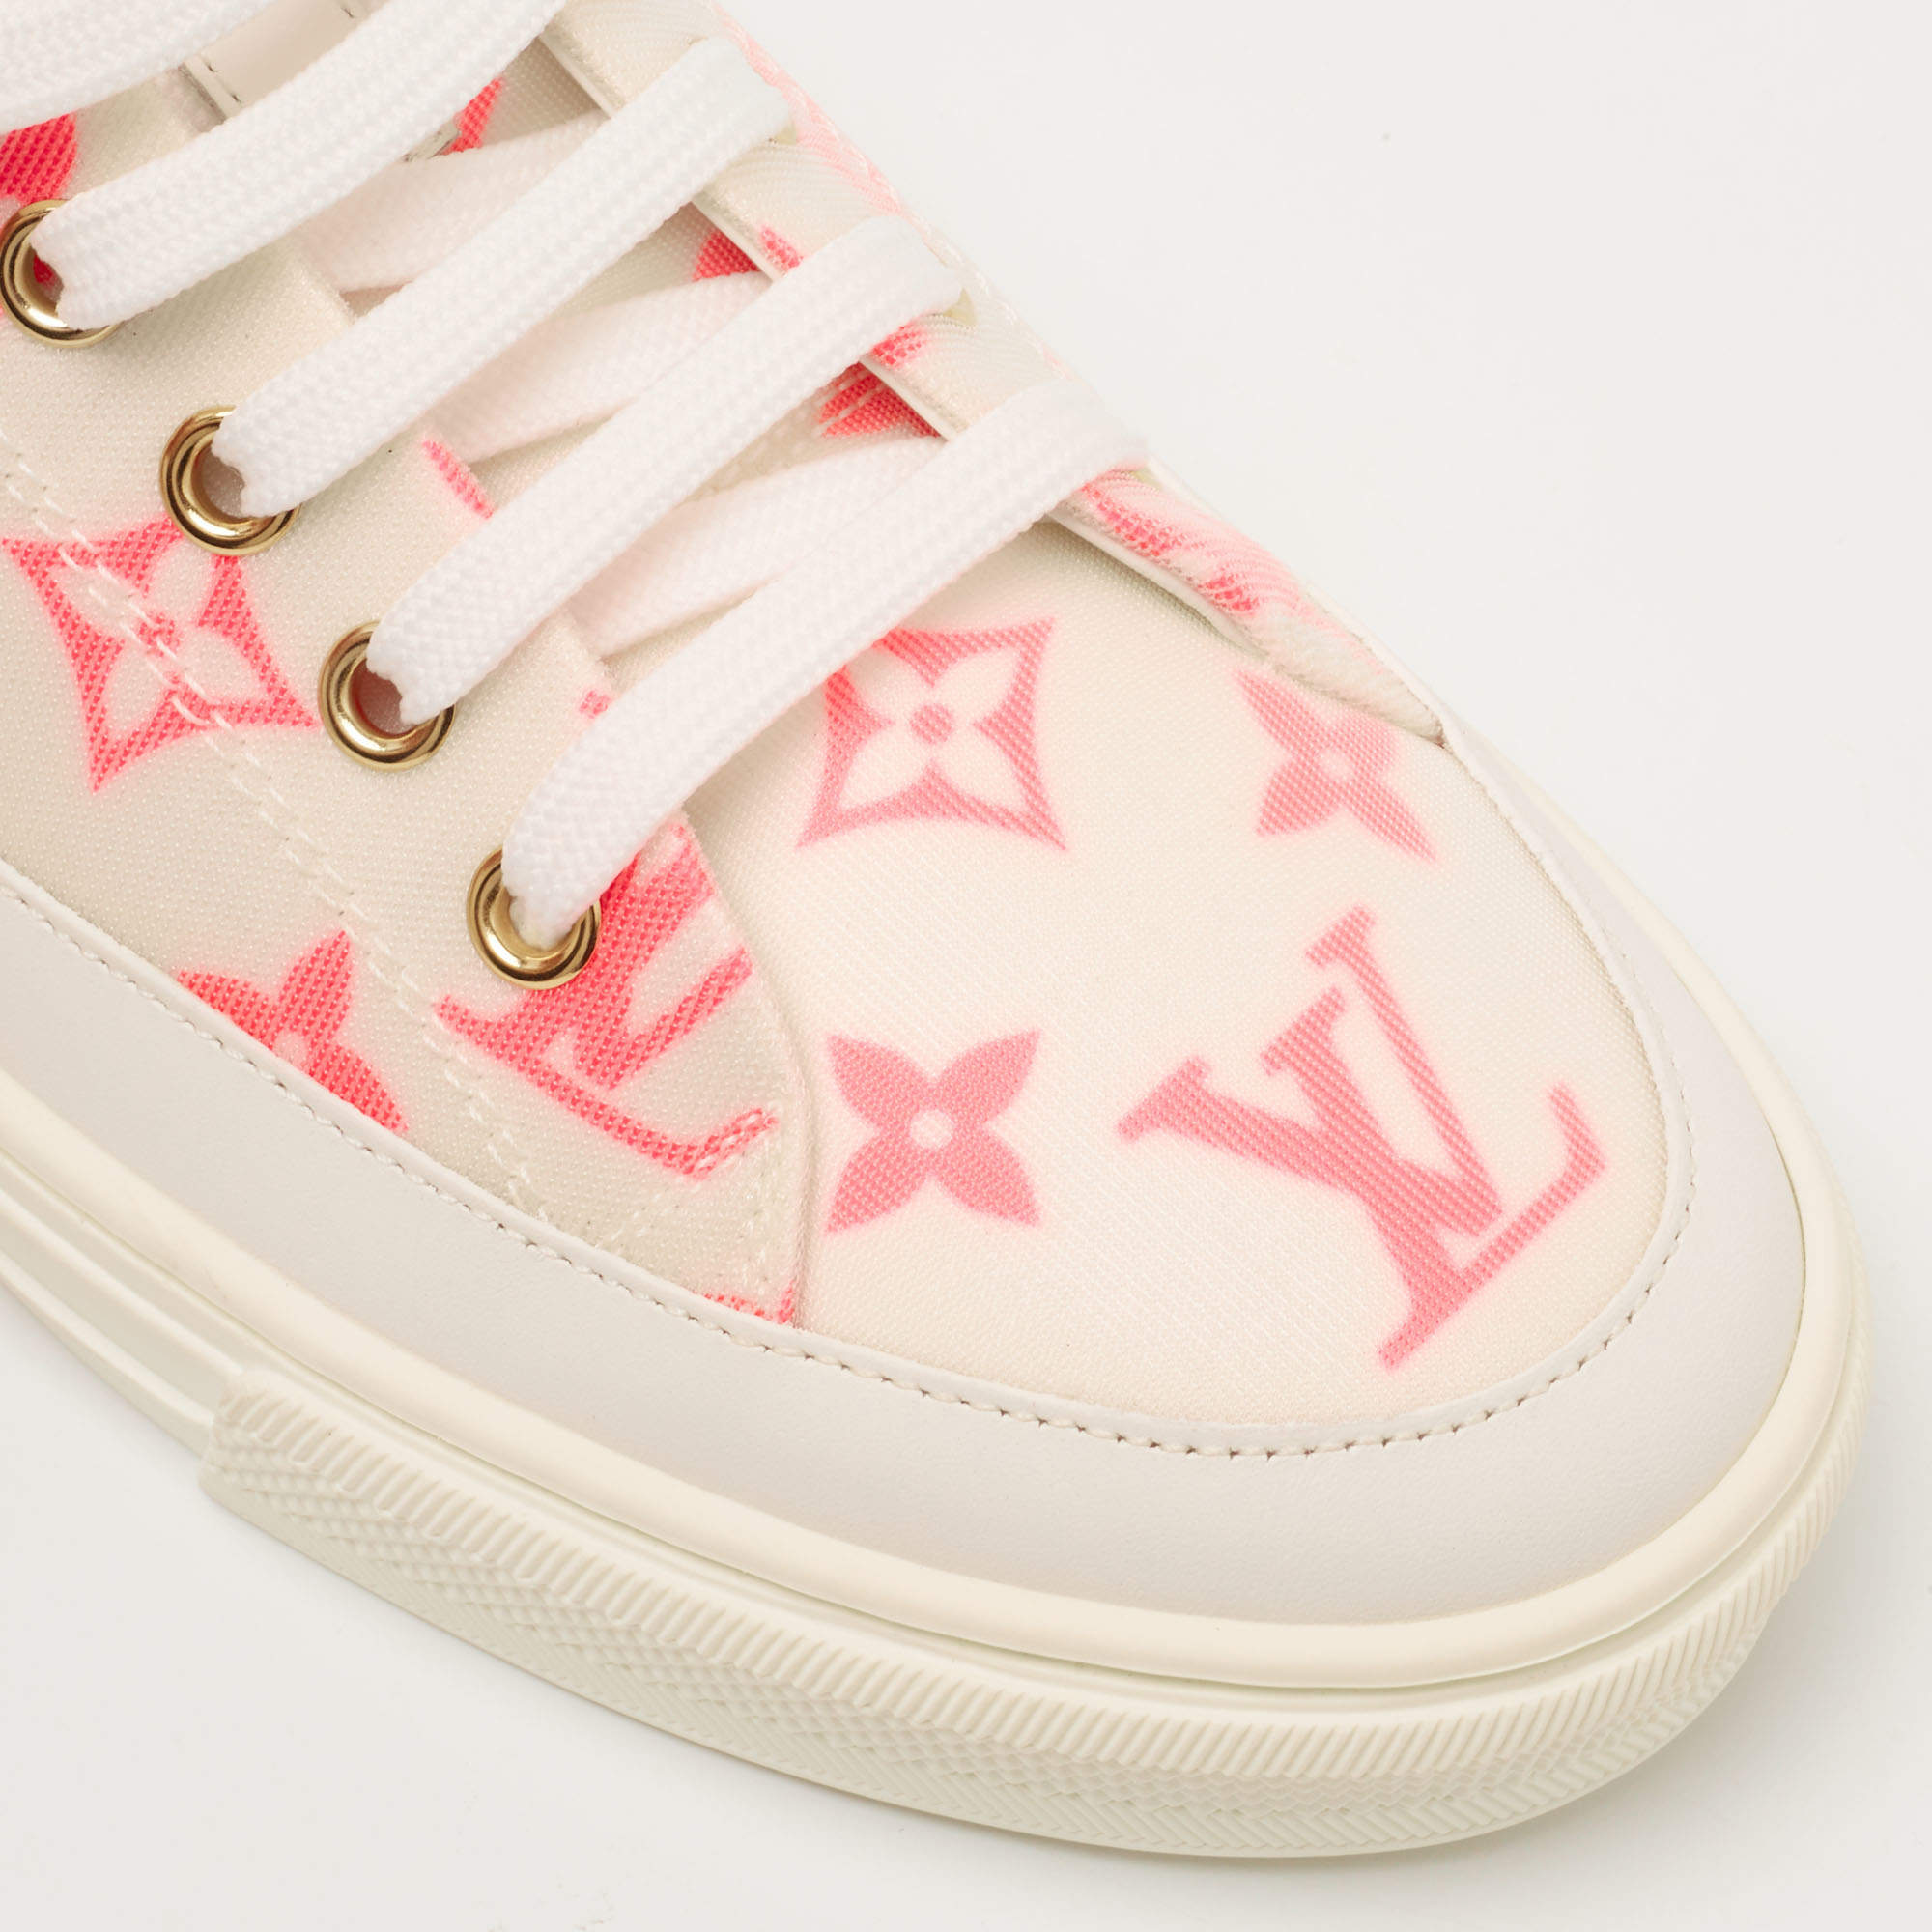 Louis Vuitton White/Pink Mesh and Leather High Top Stellar Sneakers Size  6.5/37 - Yoogi's Closet